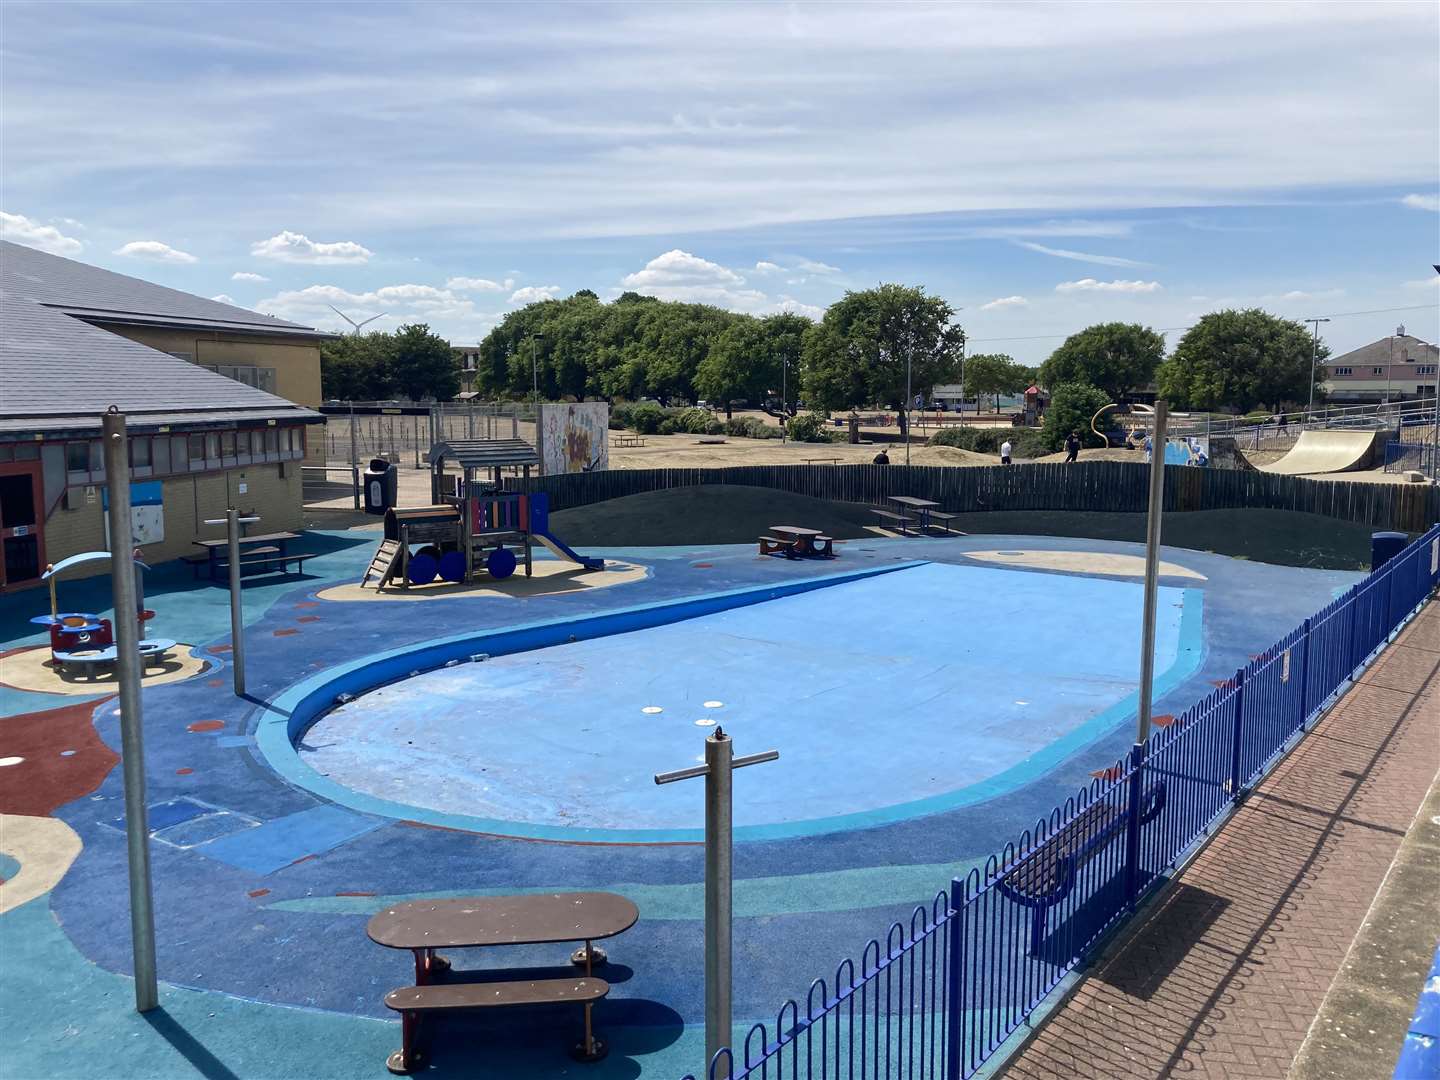 Sheerness paddling pool closed again this time because of a national shortage of chlorine and then no power